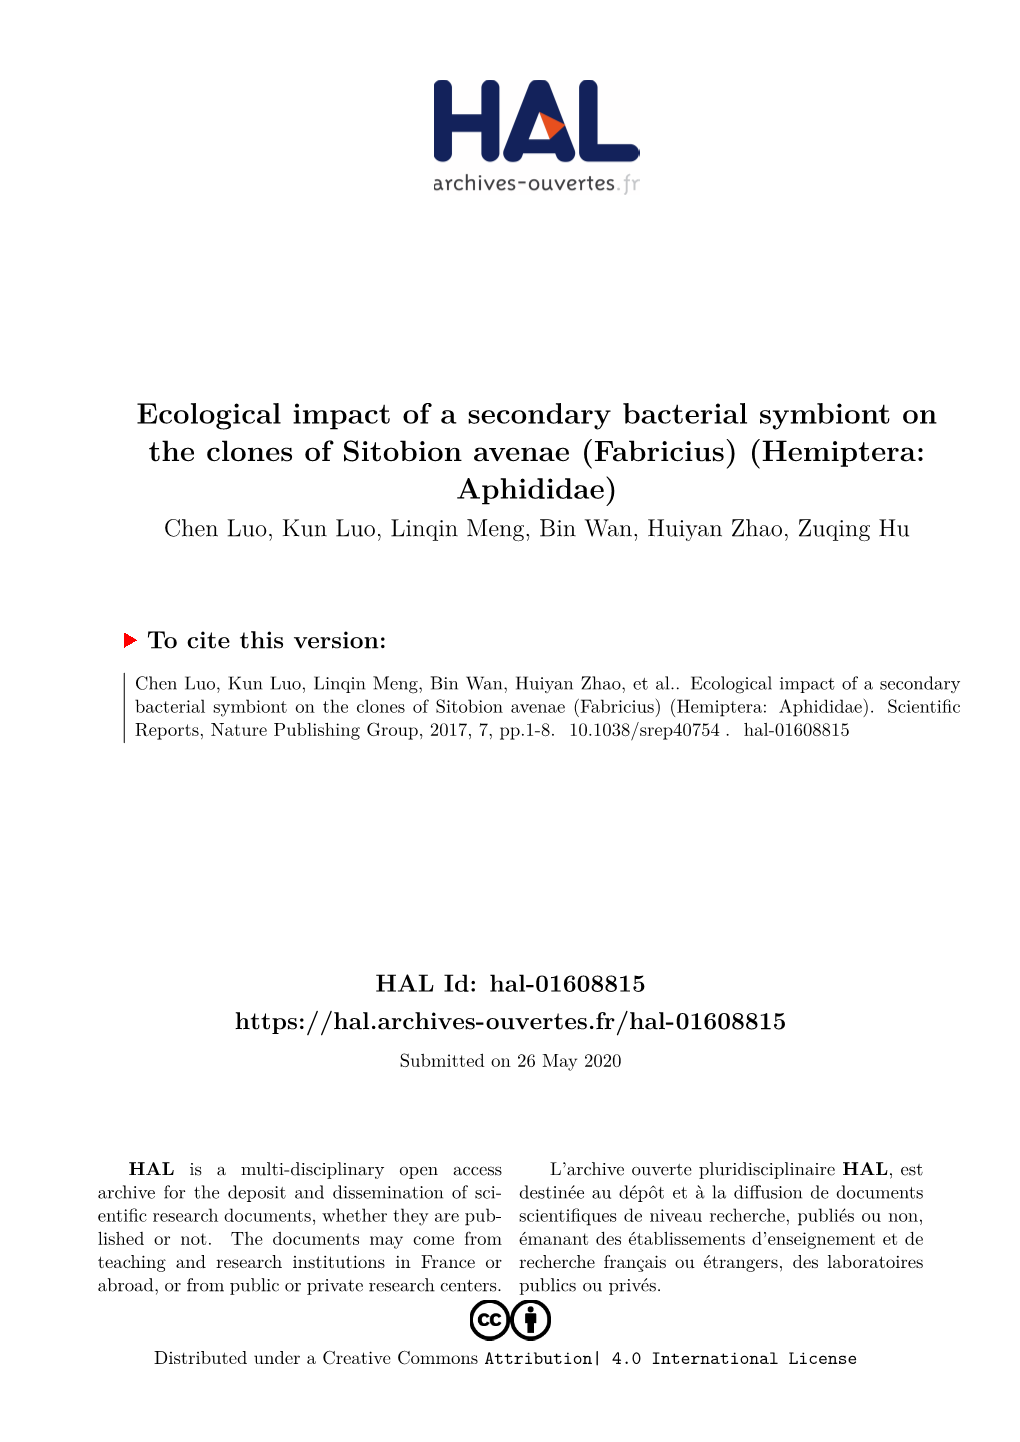 Ecological Impact of a Secondary Bacterial Symbiont on the Clones Of